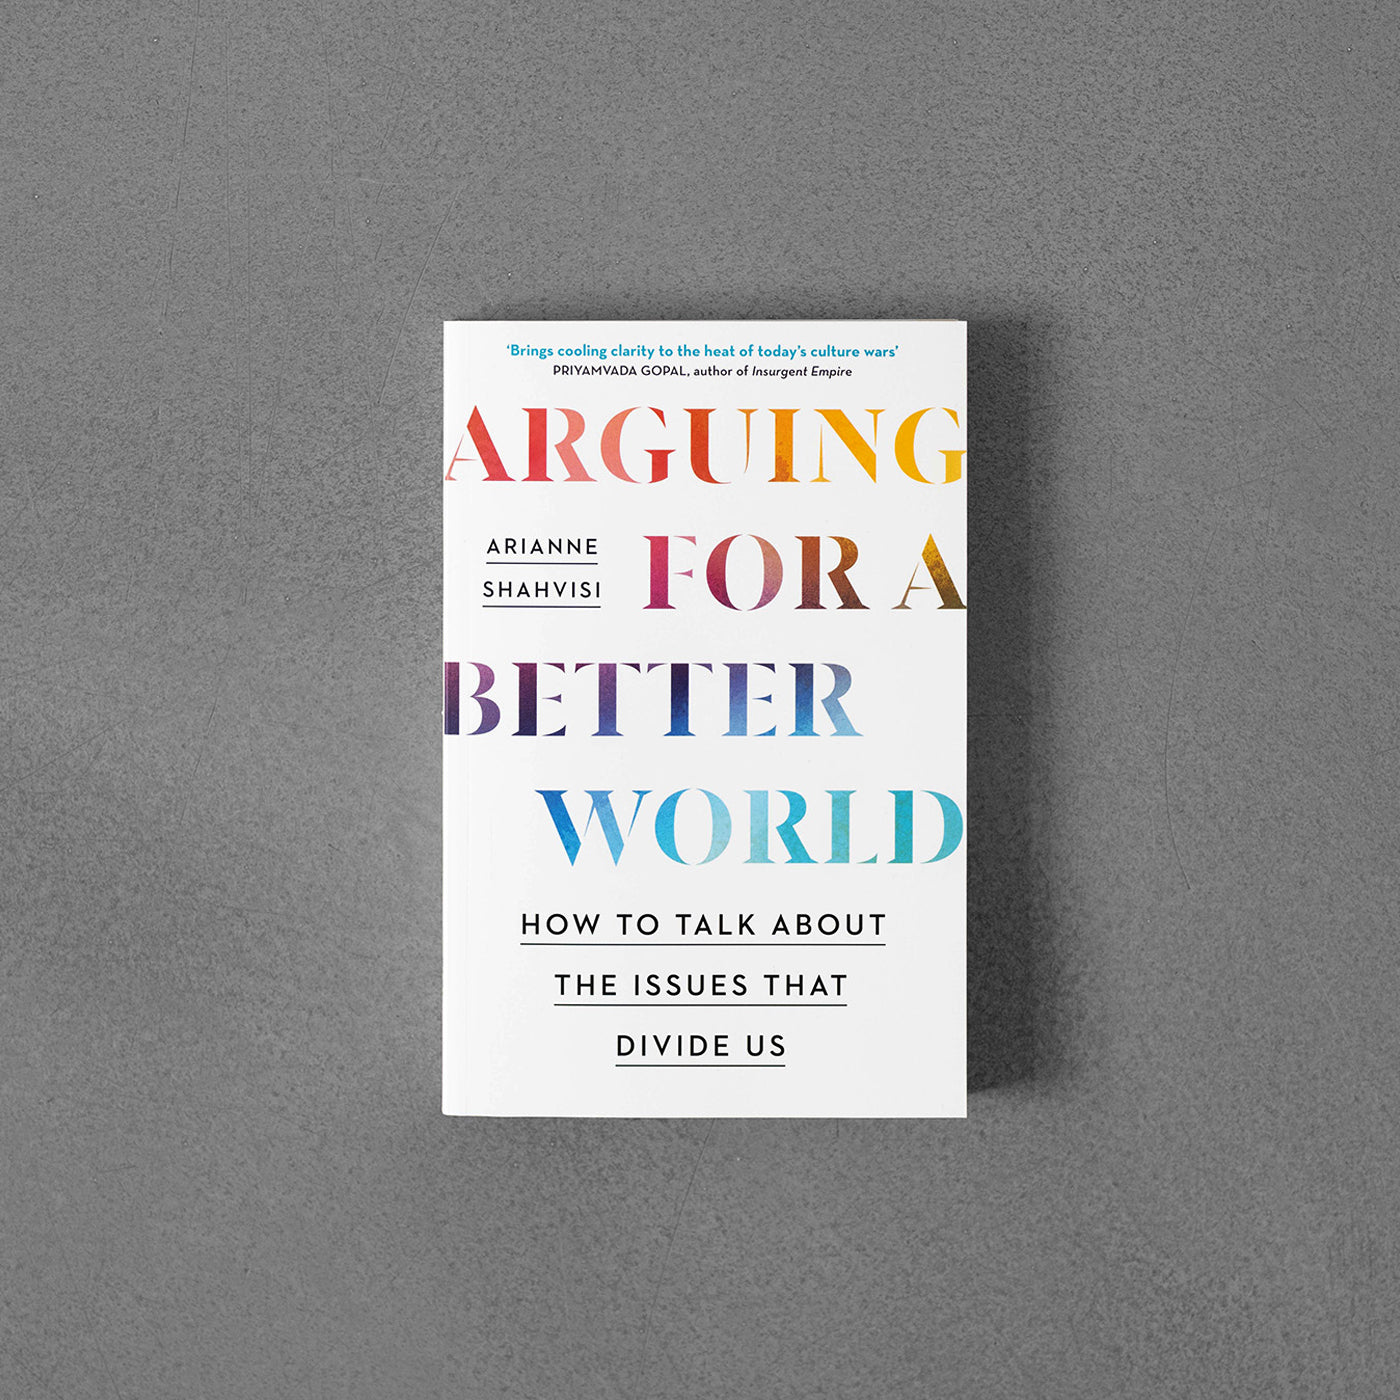 Arguing for a Better World - Arianne Shahvisi